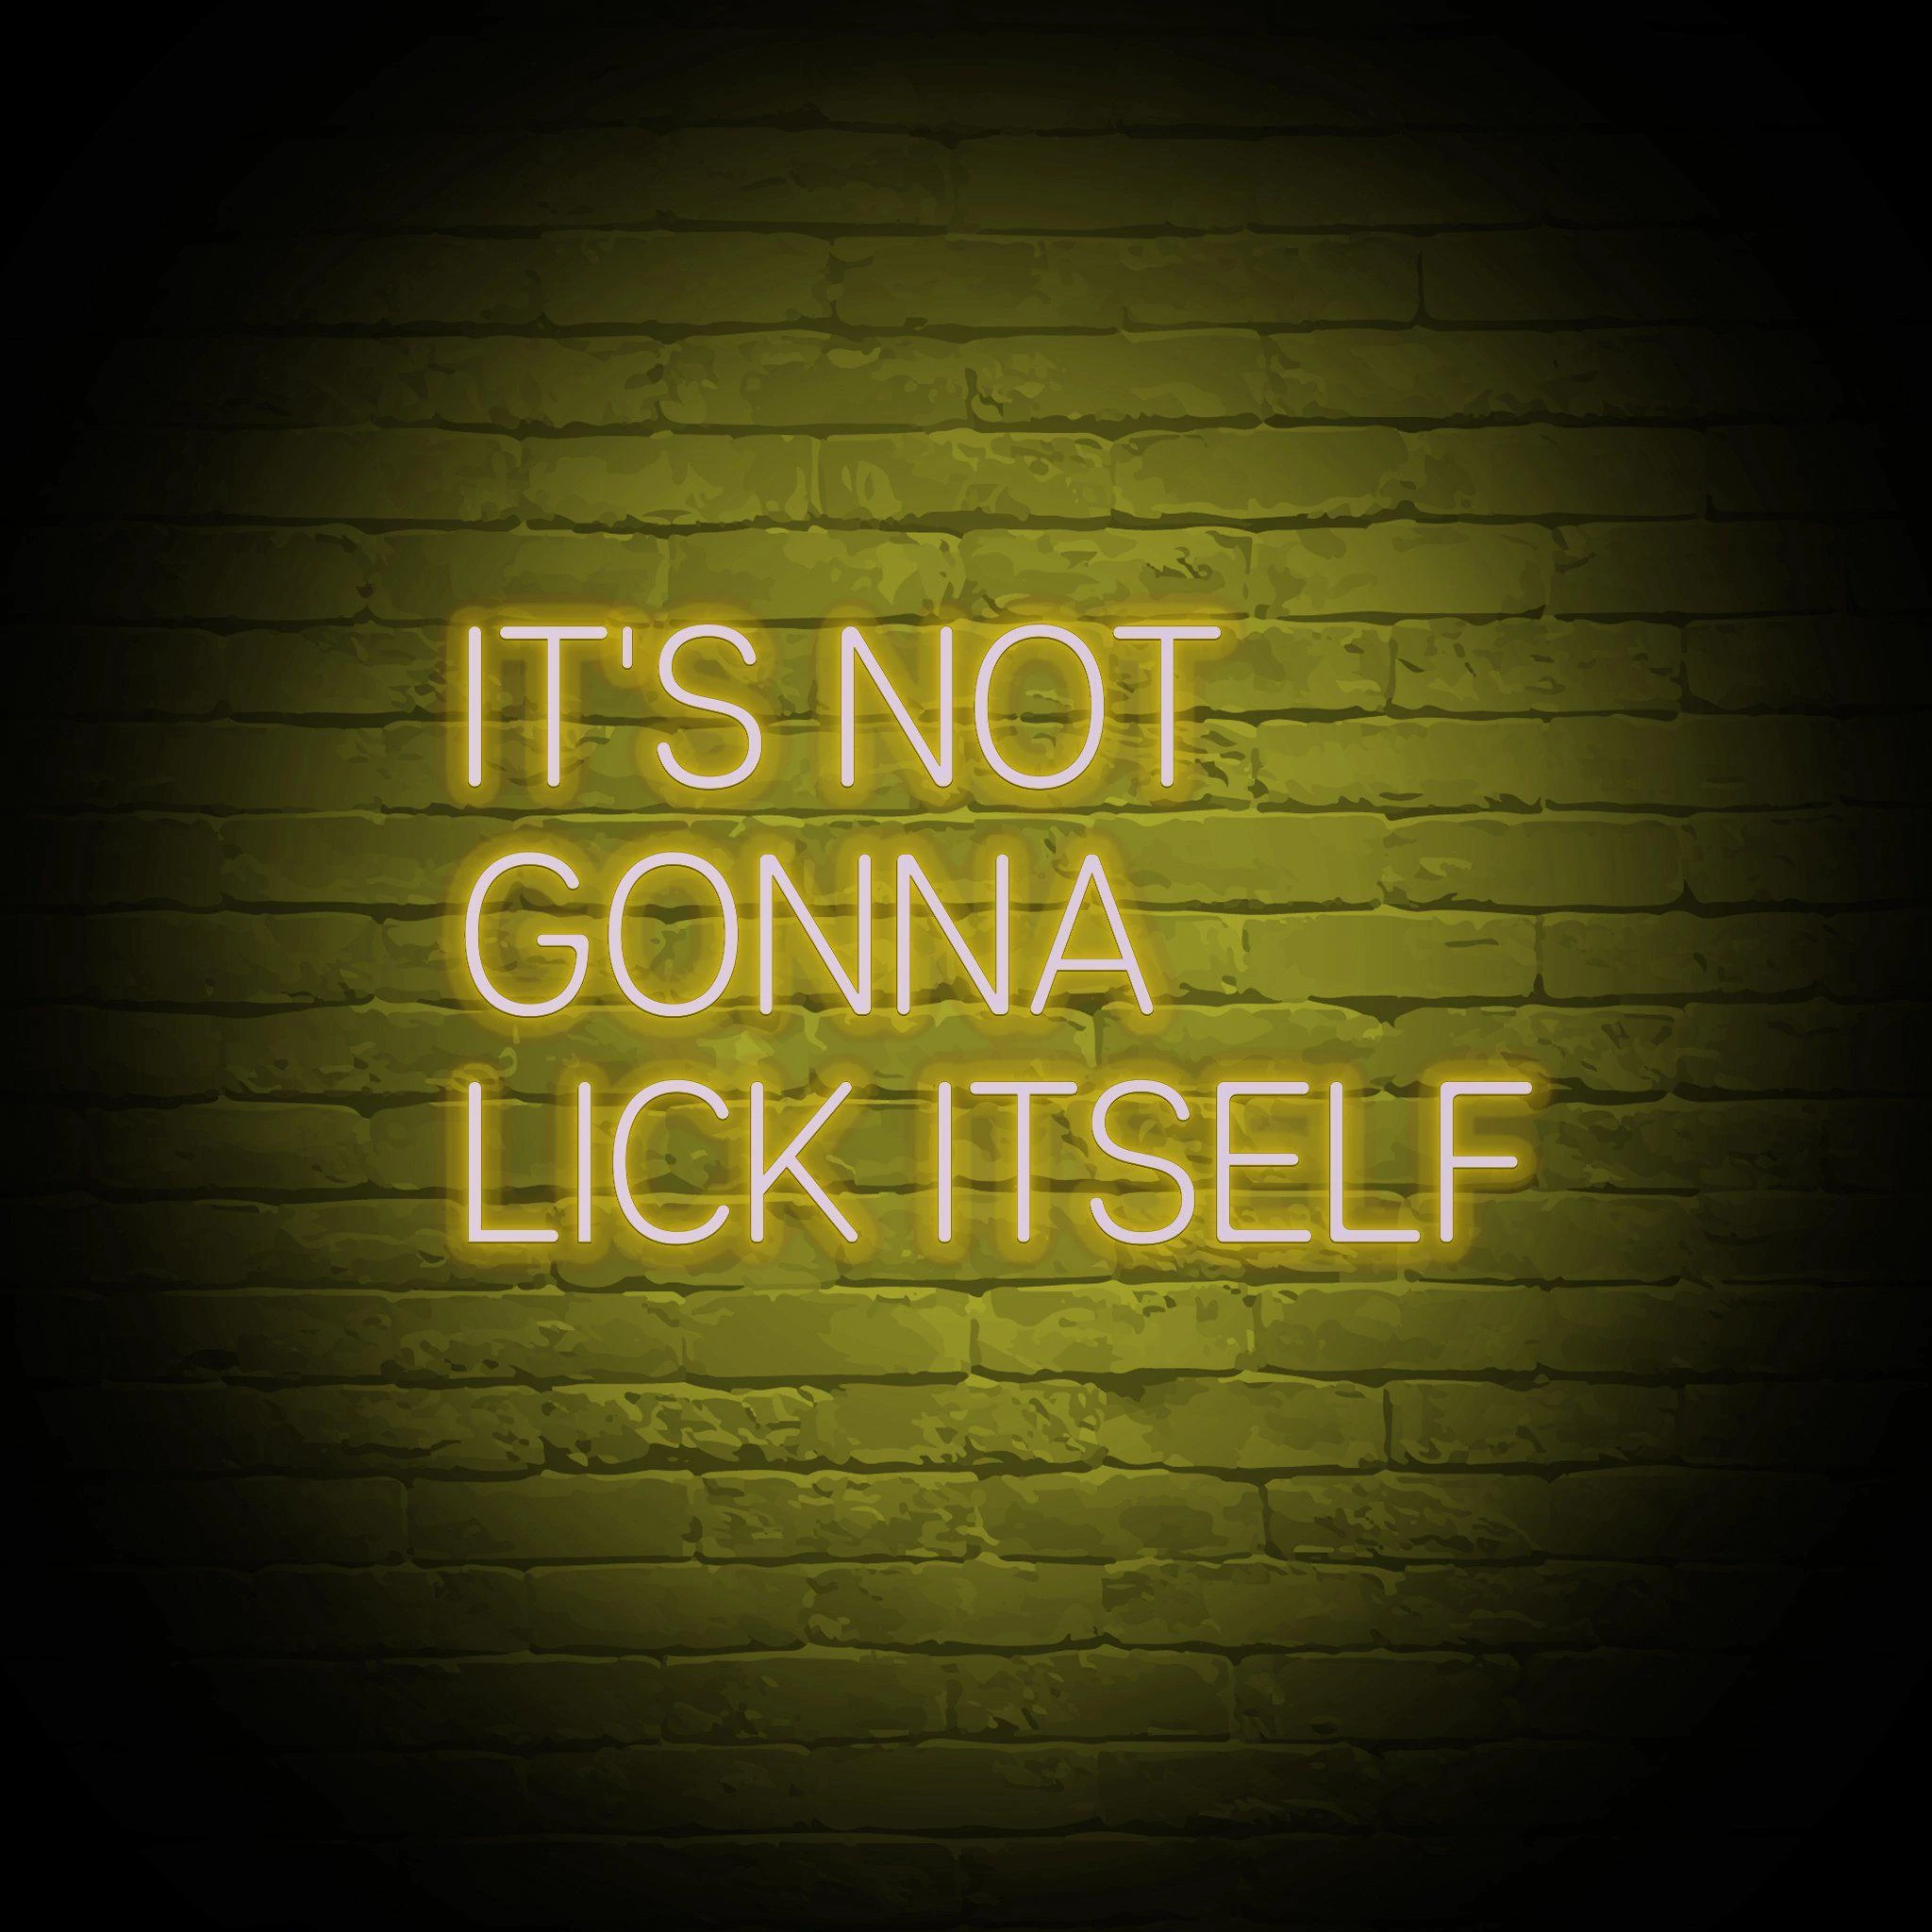 'IT'S NOT GONNA LICK ITSELF' NEON SIGN